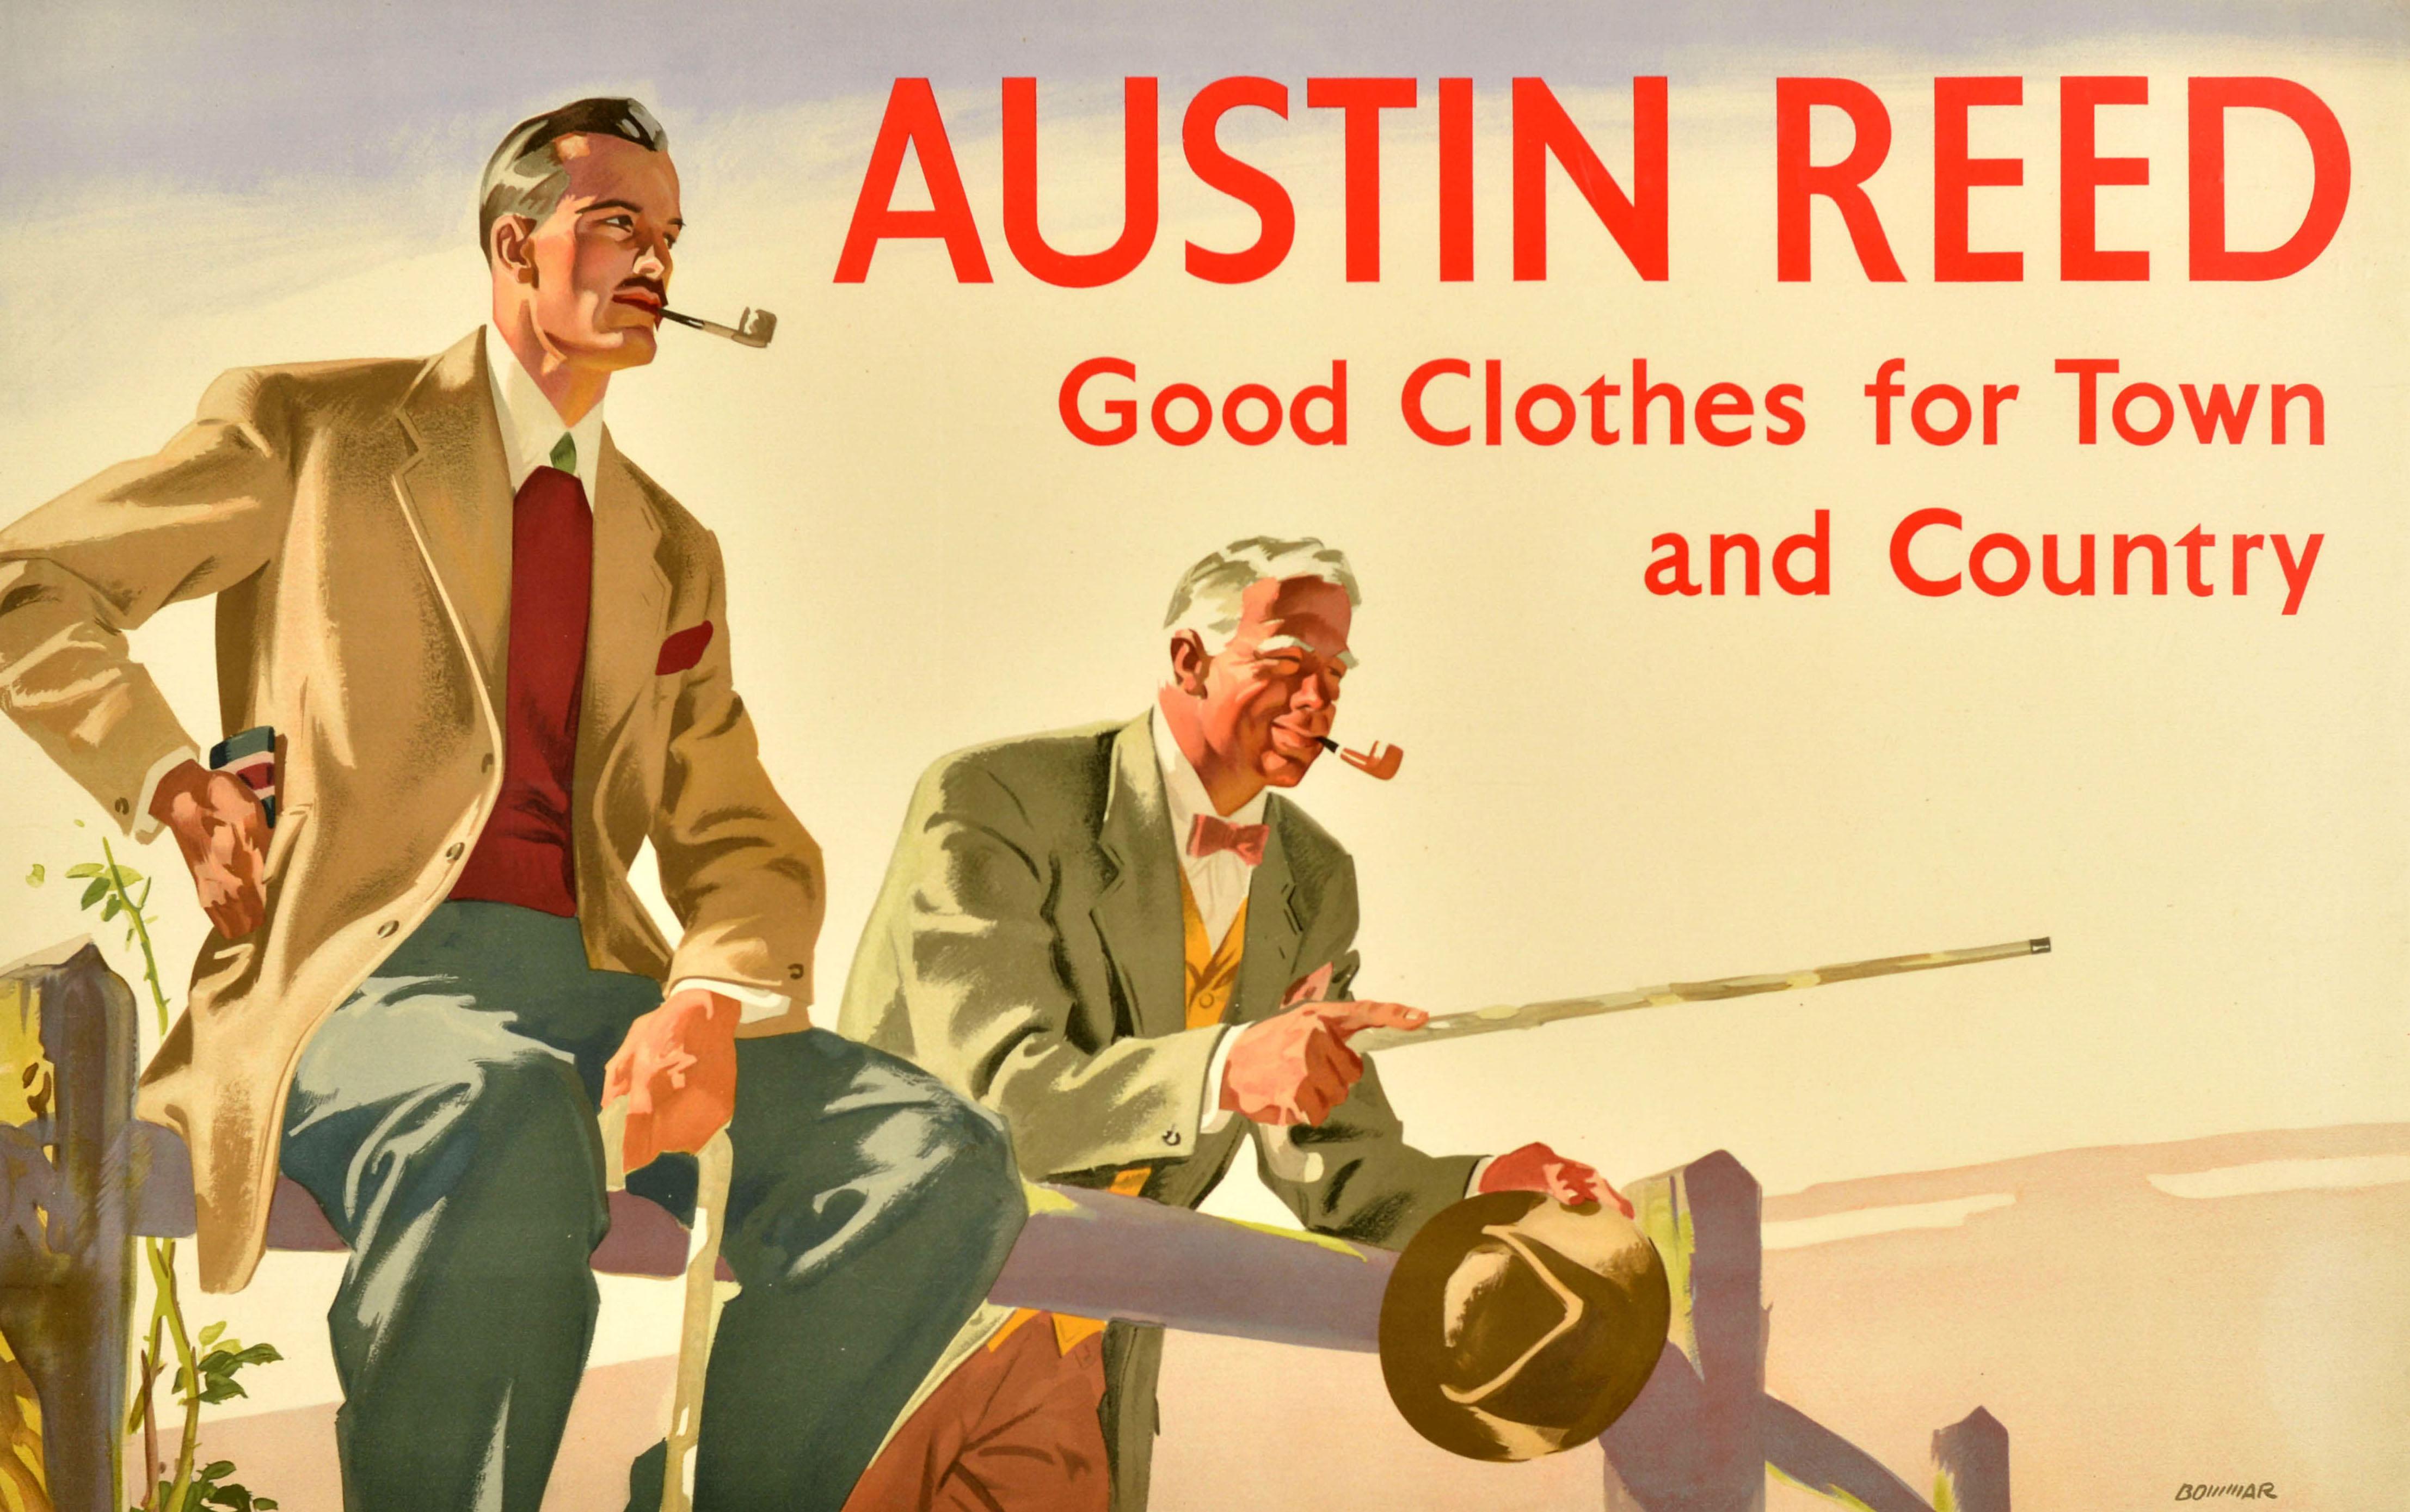 Original vintage men's fashion advertising poster - Austin Reed Good Clothes for Town and Country - featuring a stunning image of two elegantly dressed gentlemen smoking pipes with the bold title text above, the younger man with a moustache putting